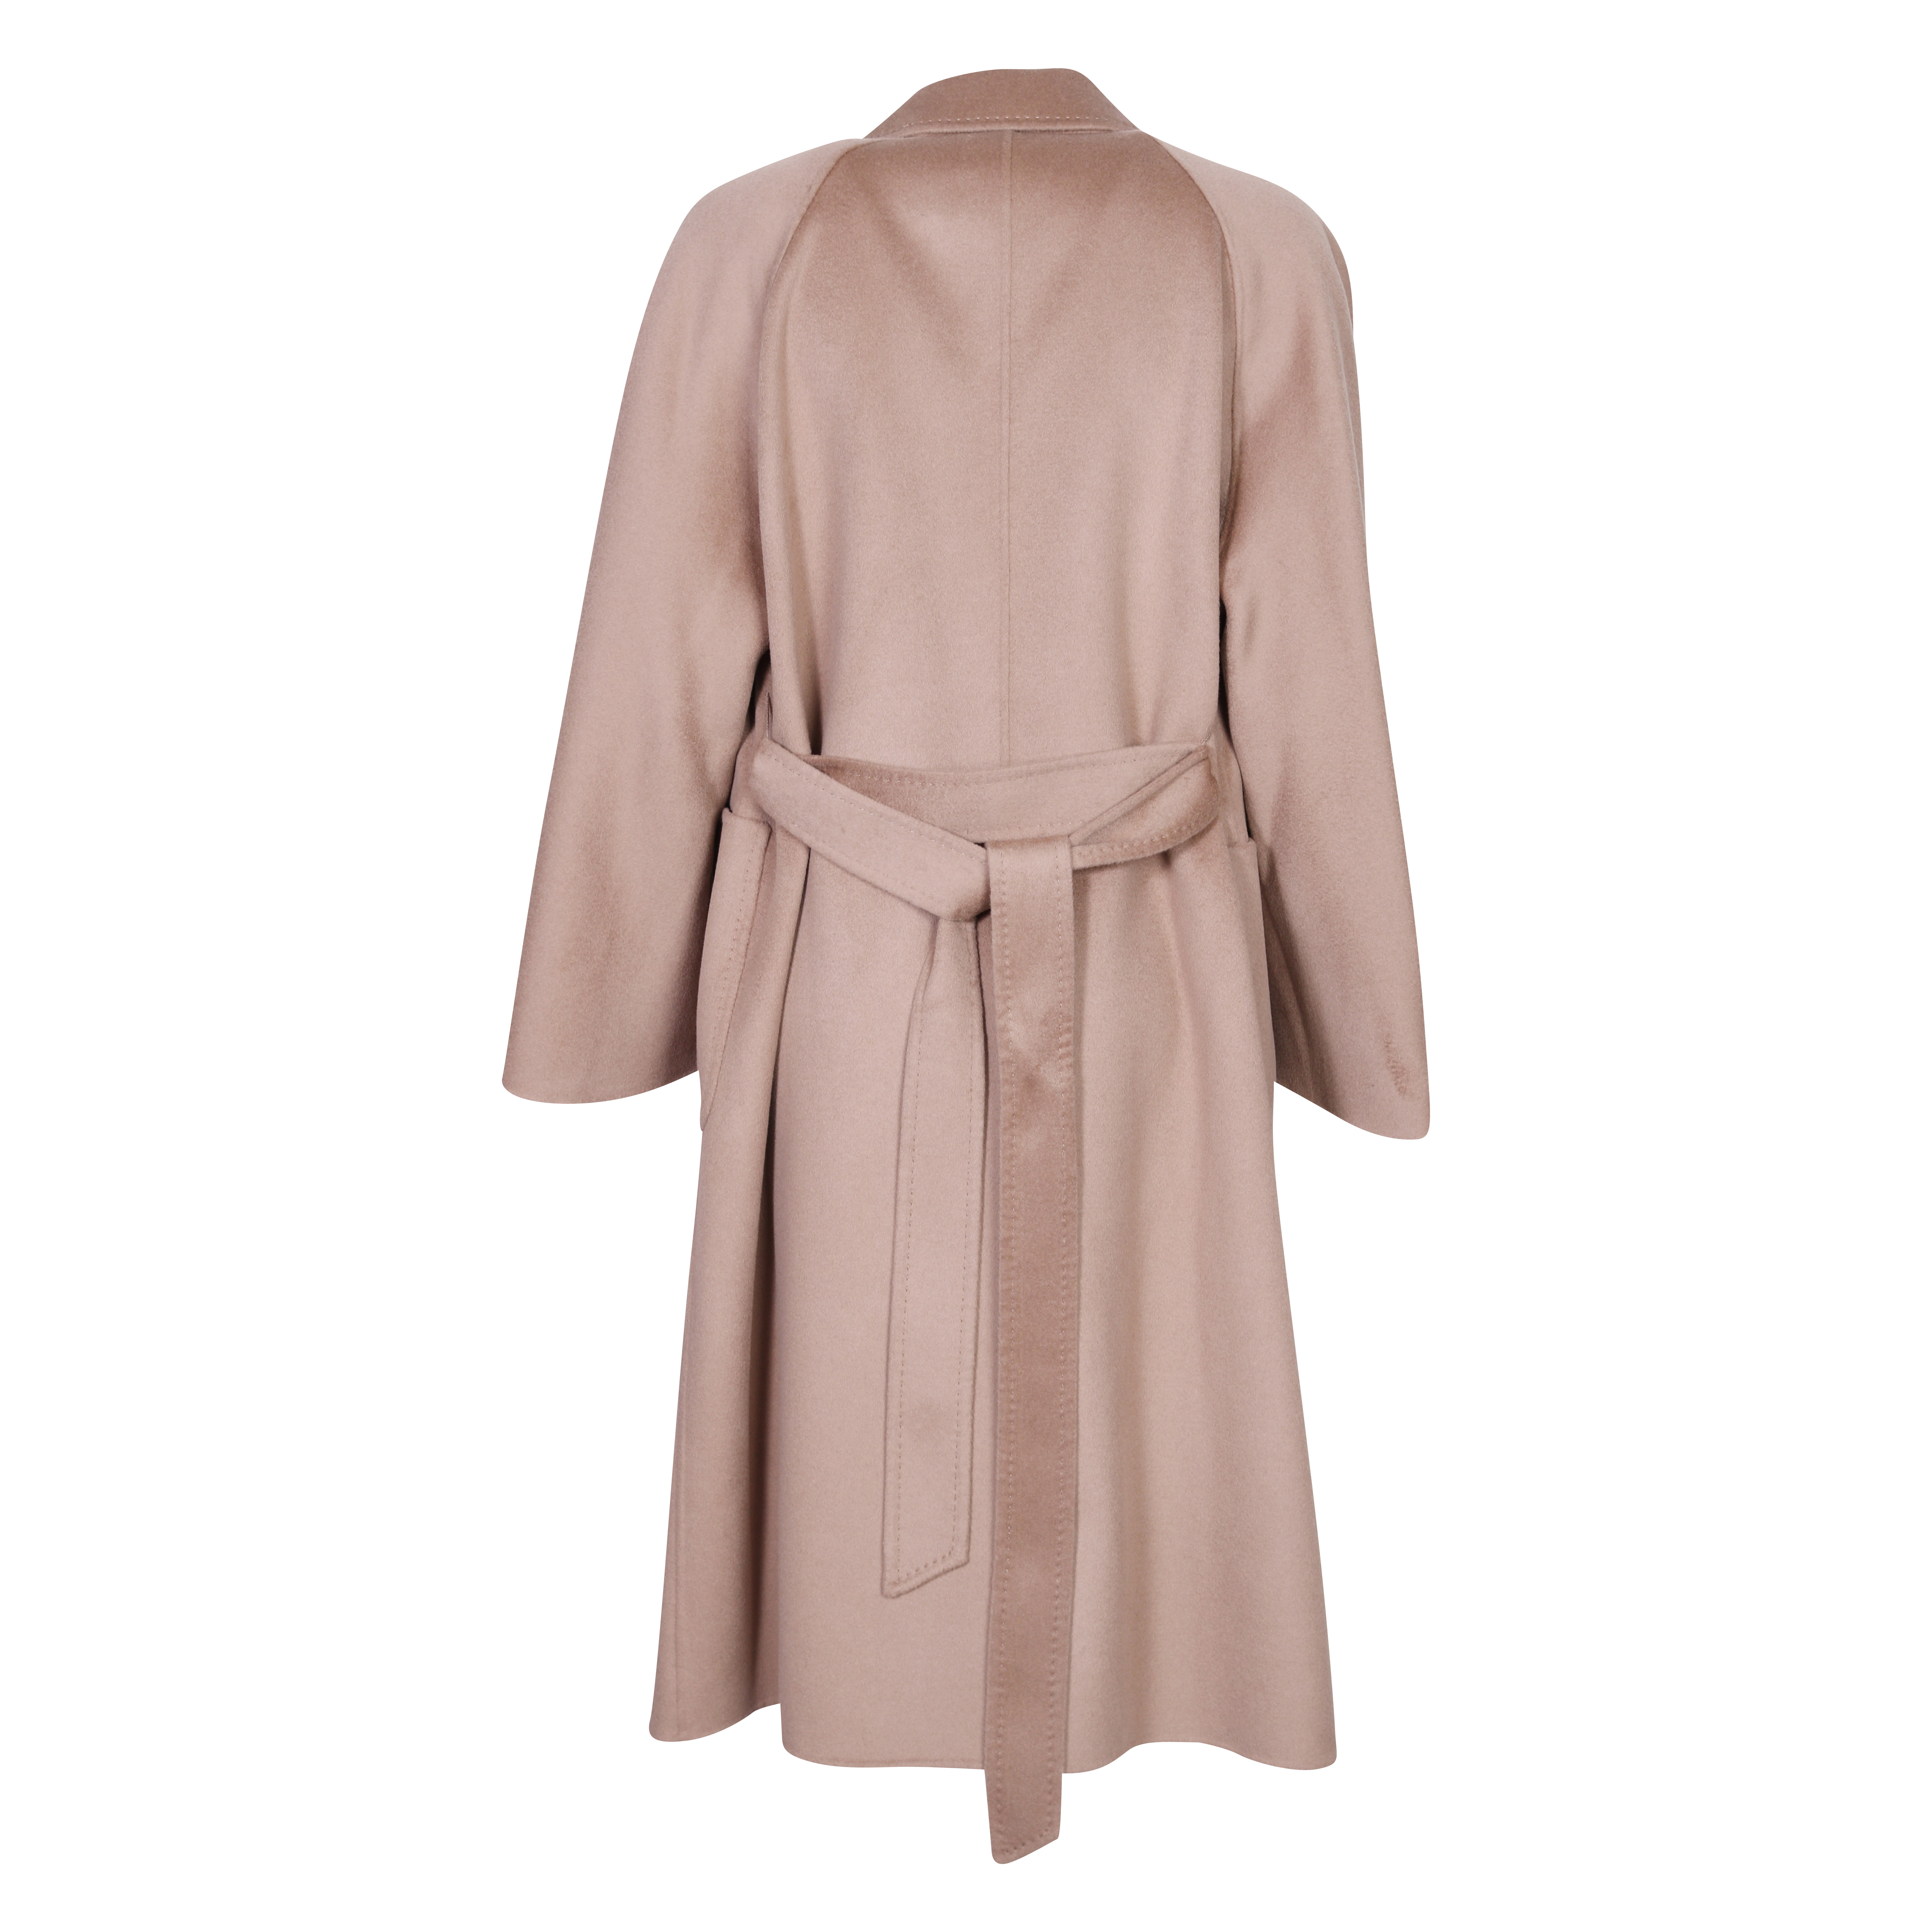 Flona Wool/Cashmere Coat in Taupe XS/S